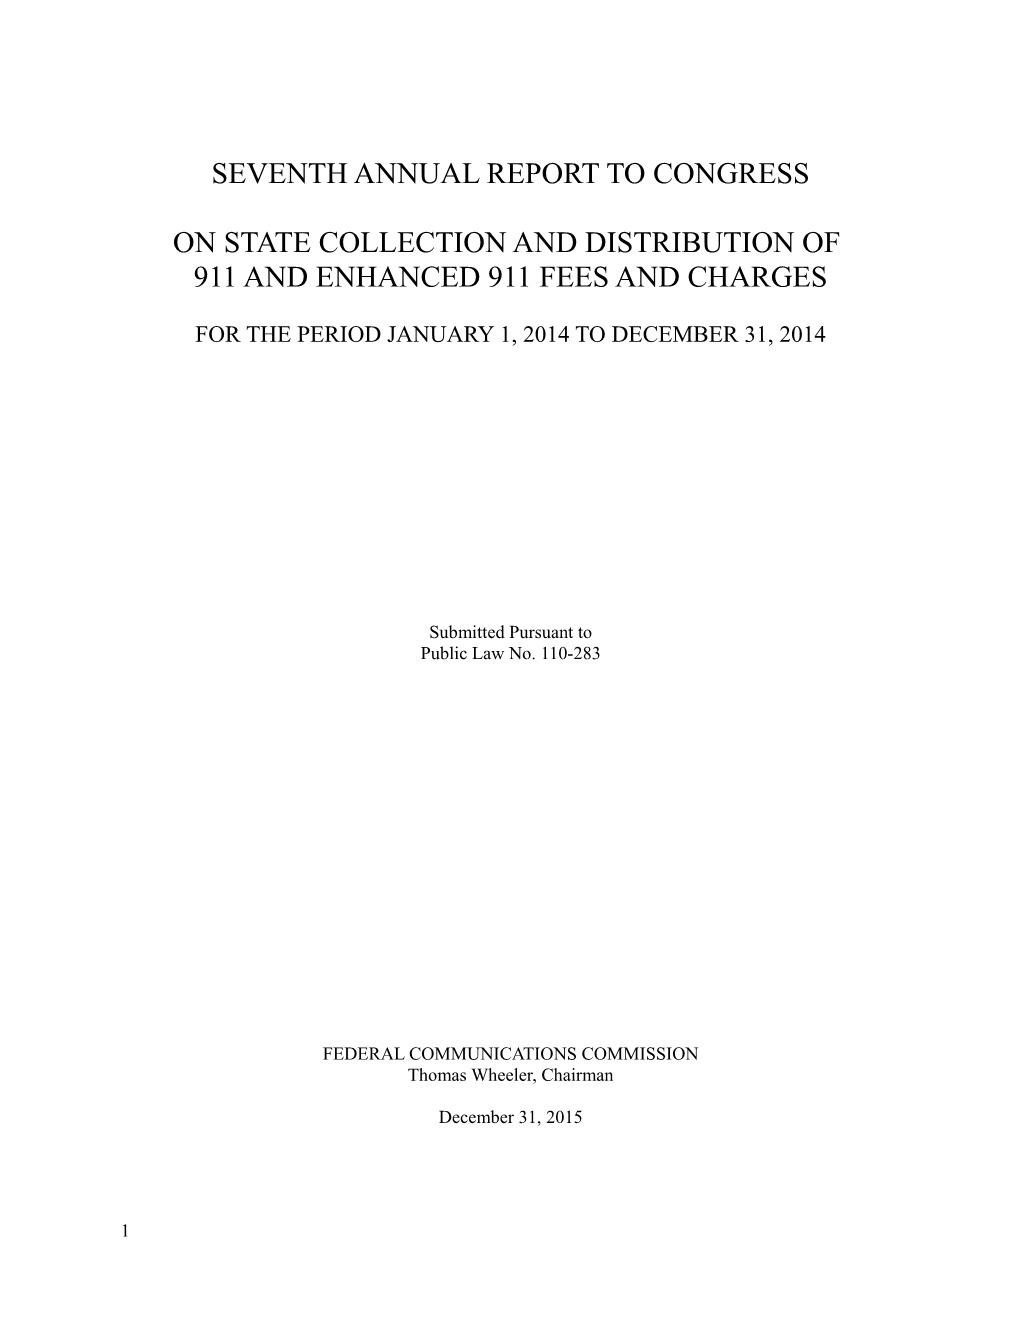 Seventh Annual Report to Congress